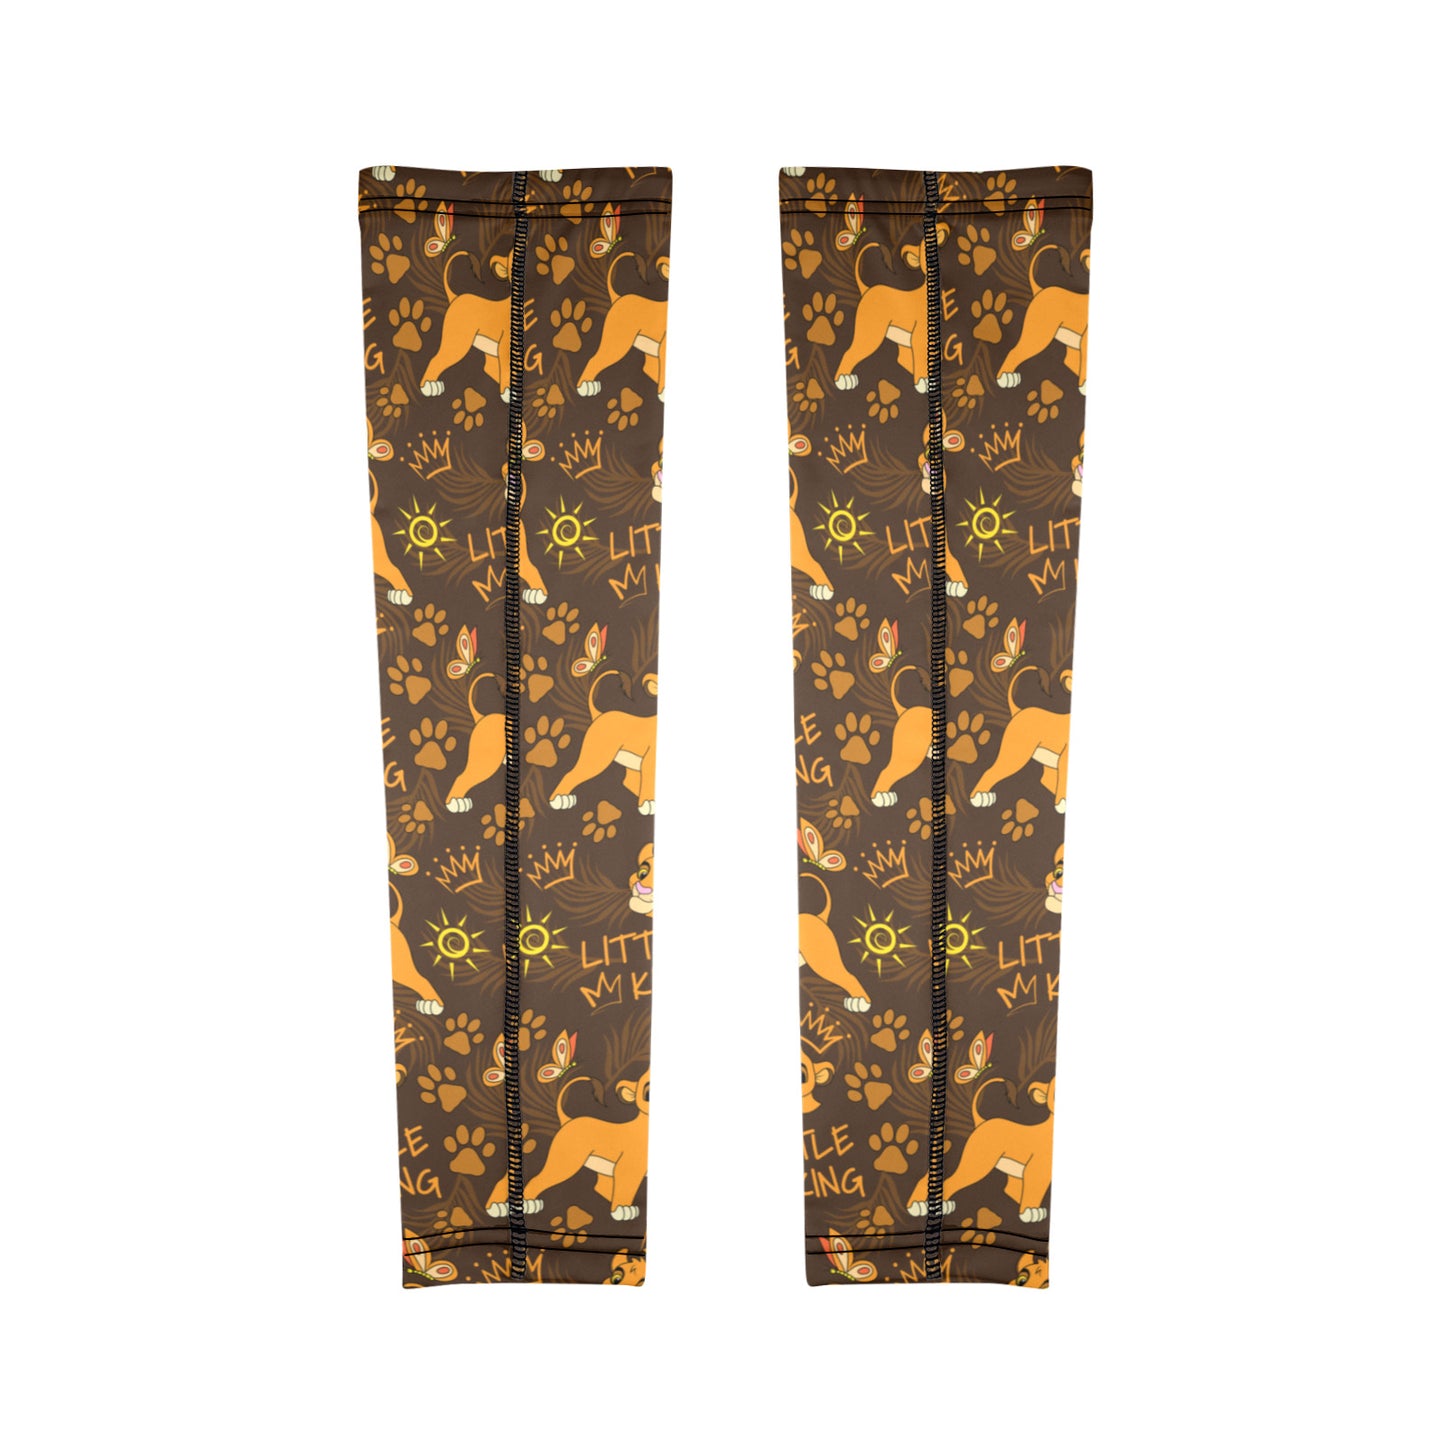 Little King Arm Sleeves (Set of Two)